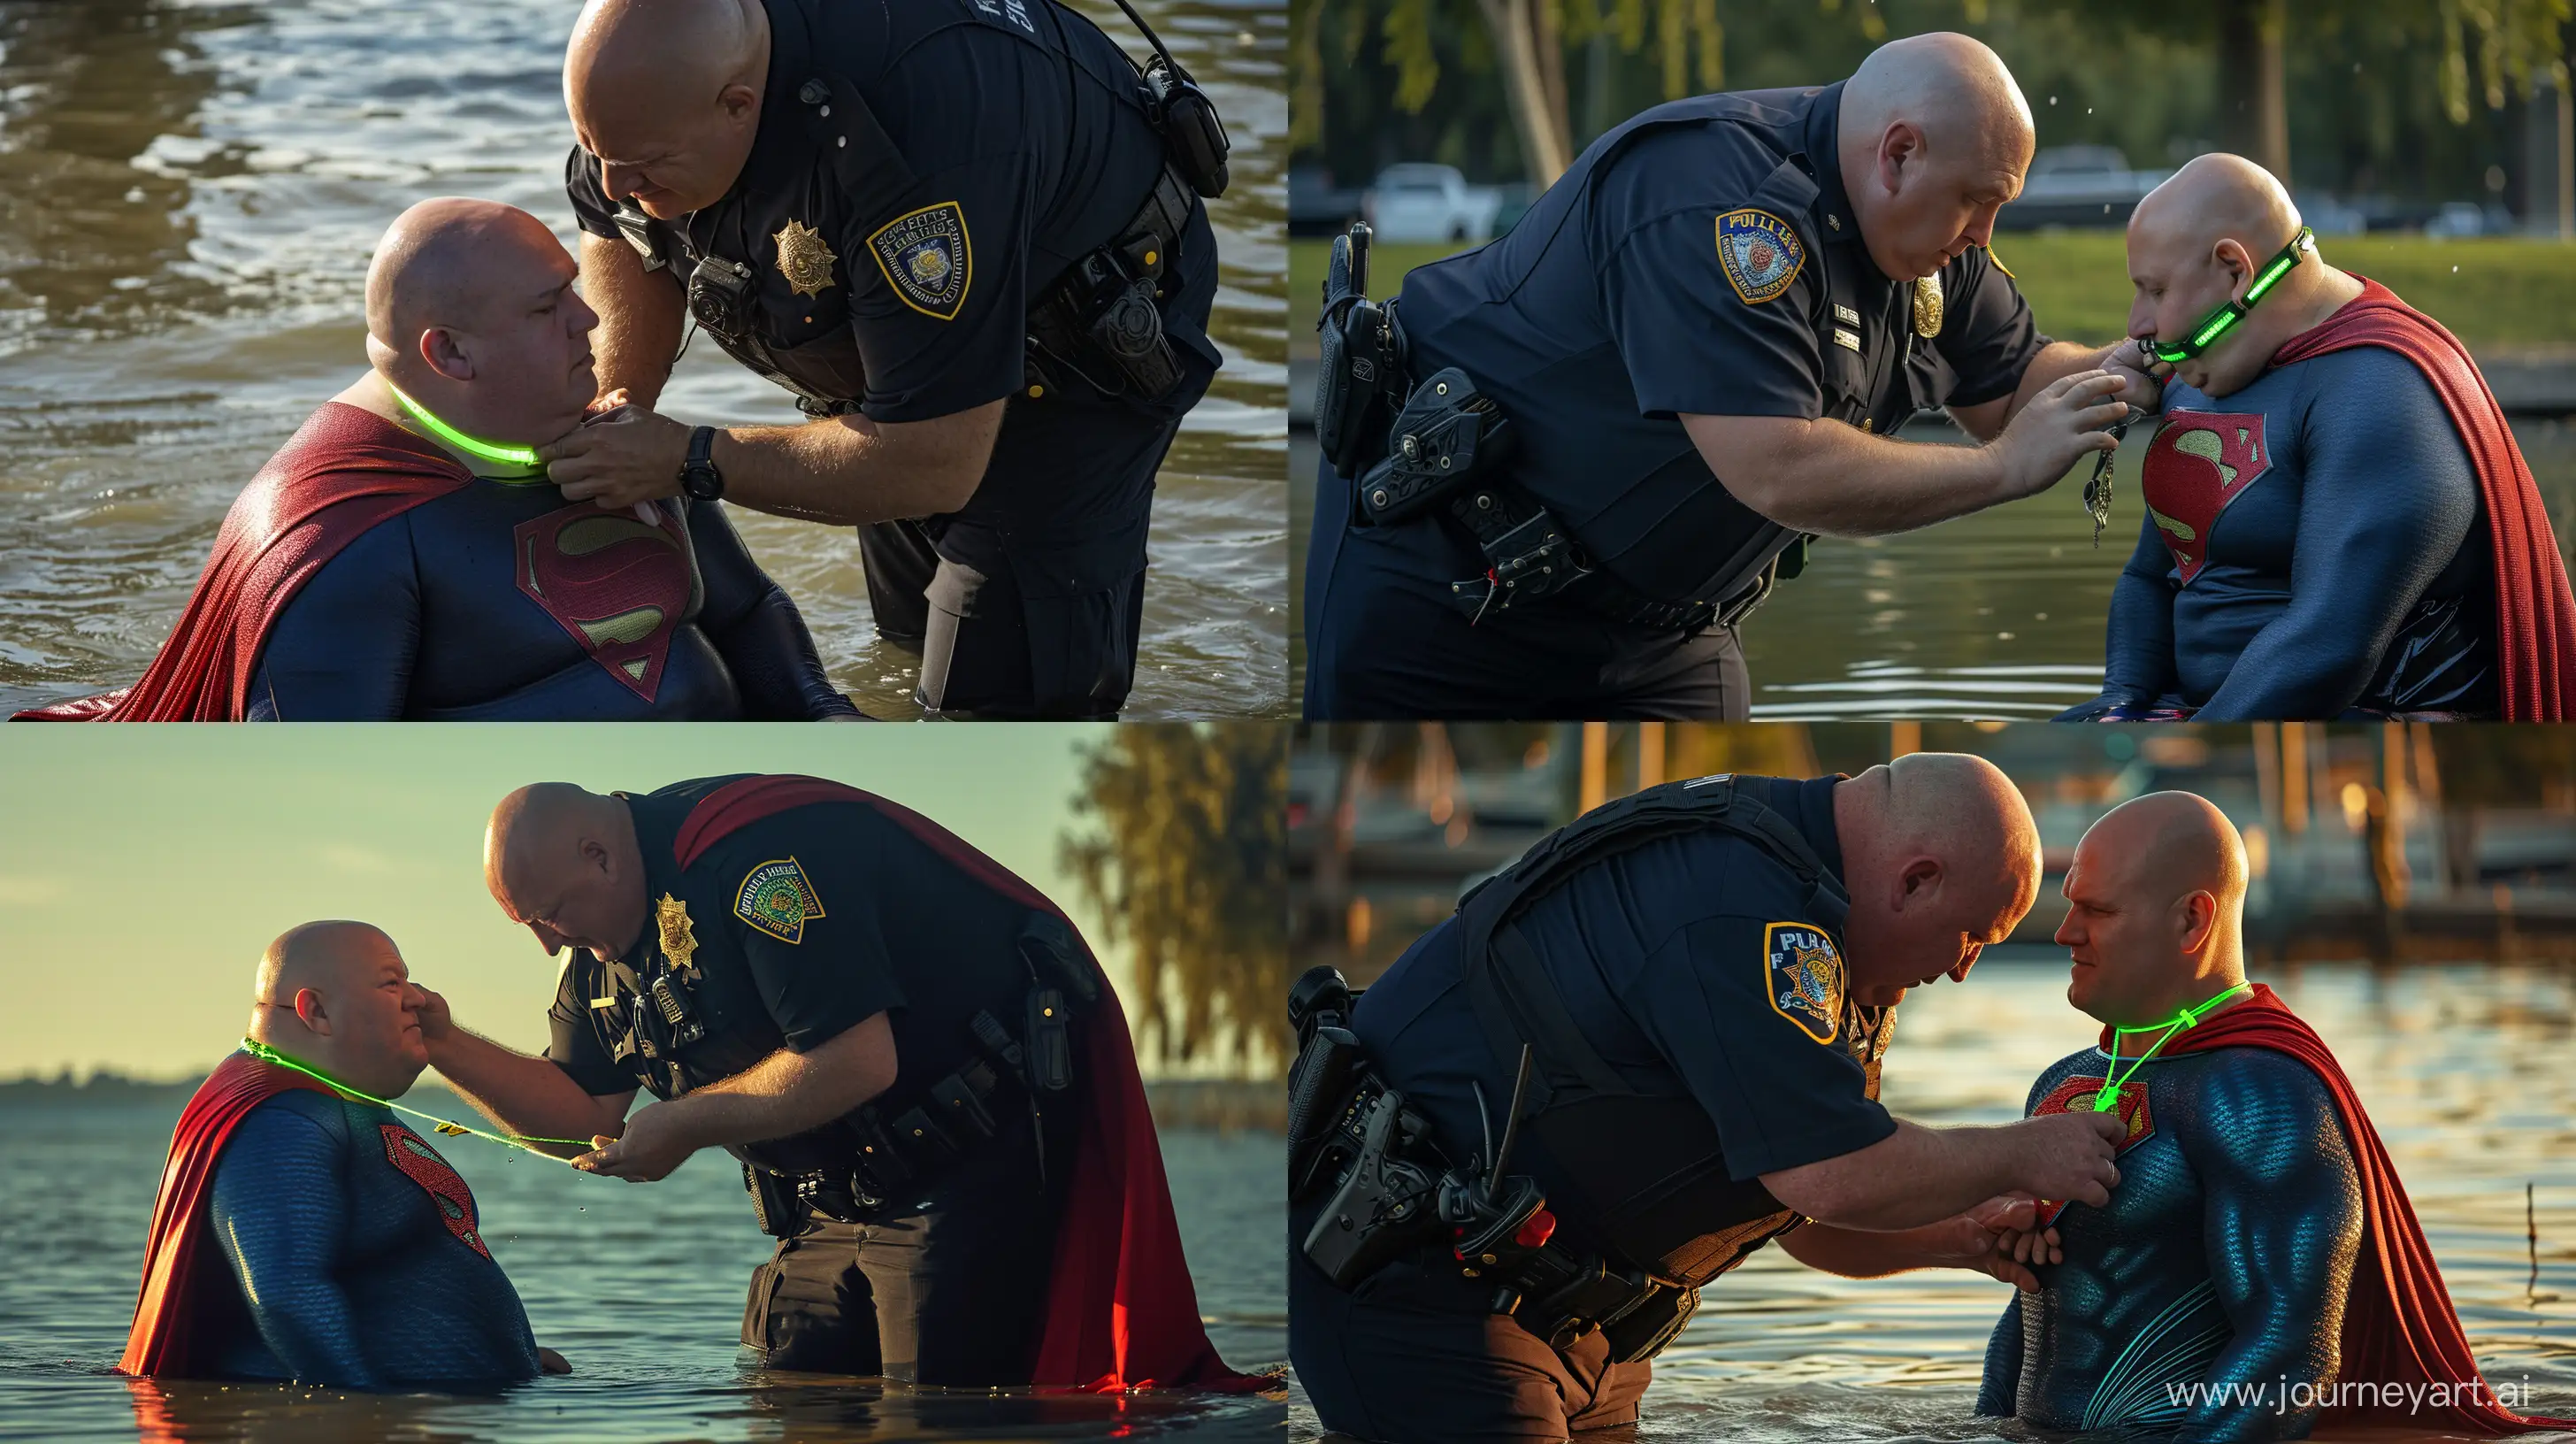 Senior-Police-Officer-Collaring-Man-in-Superman-Costume-by-Water